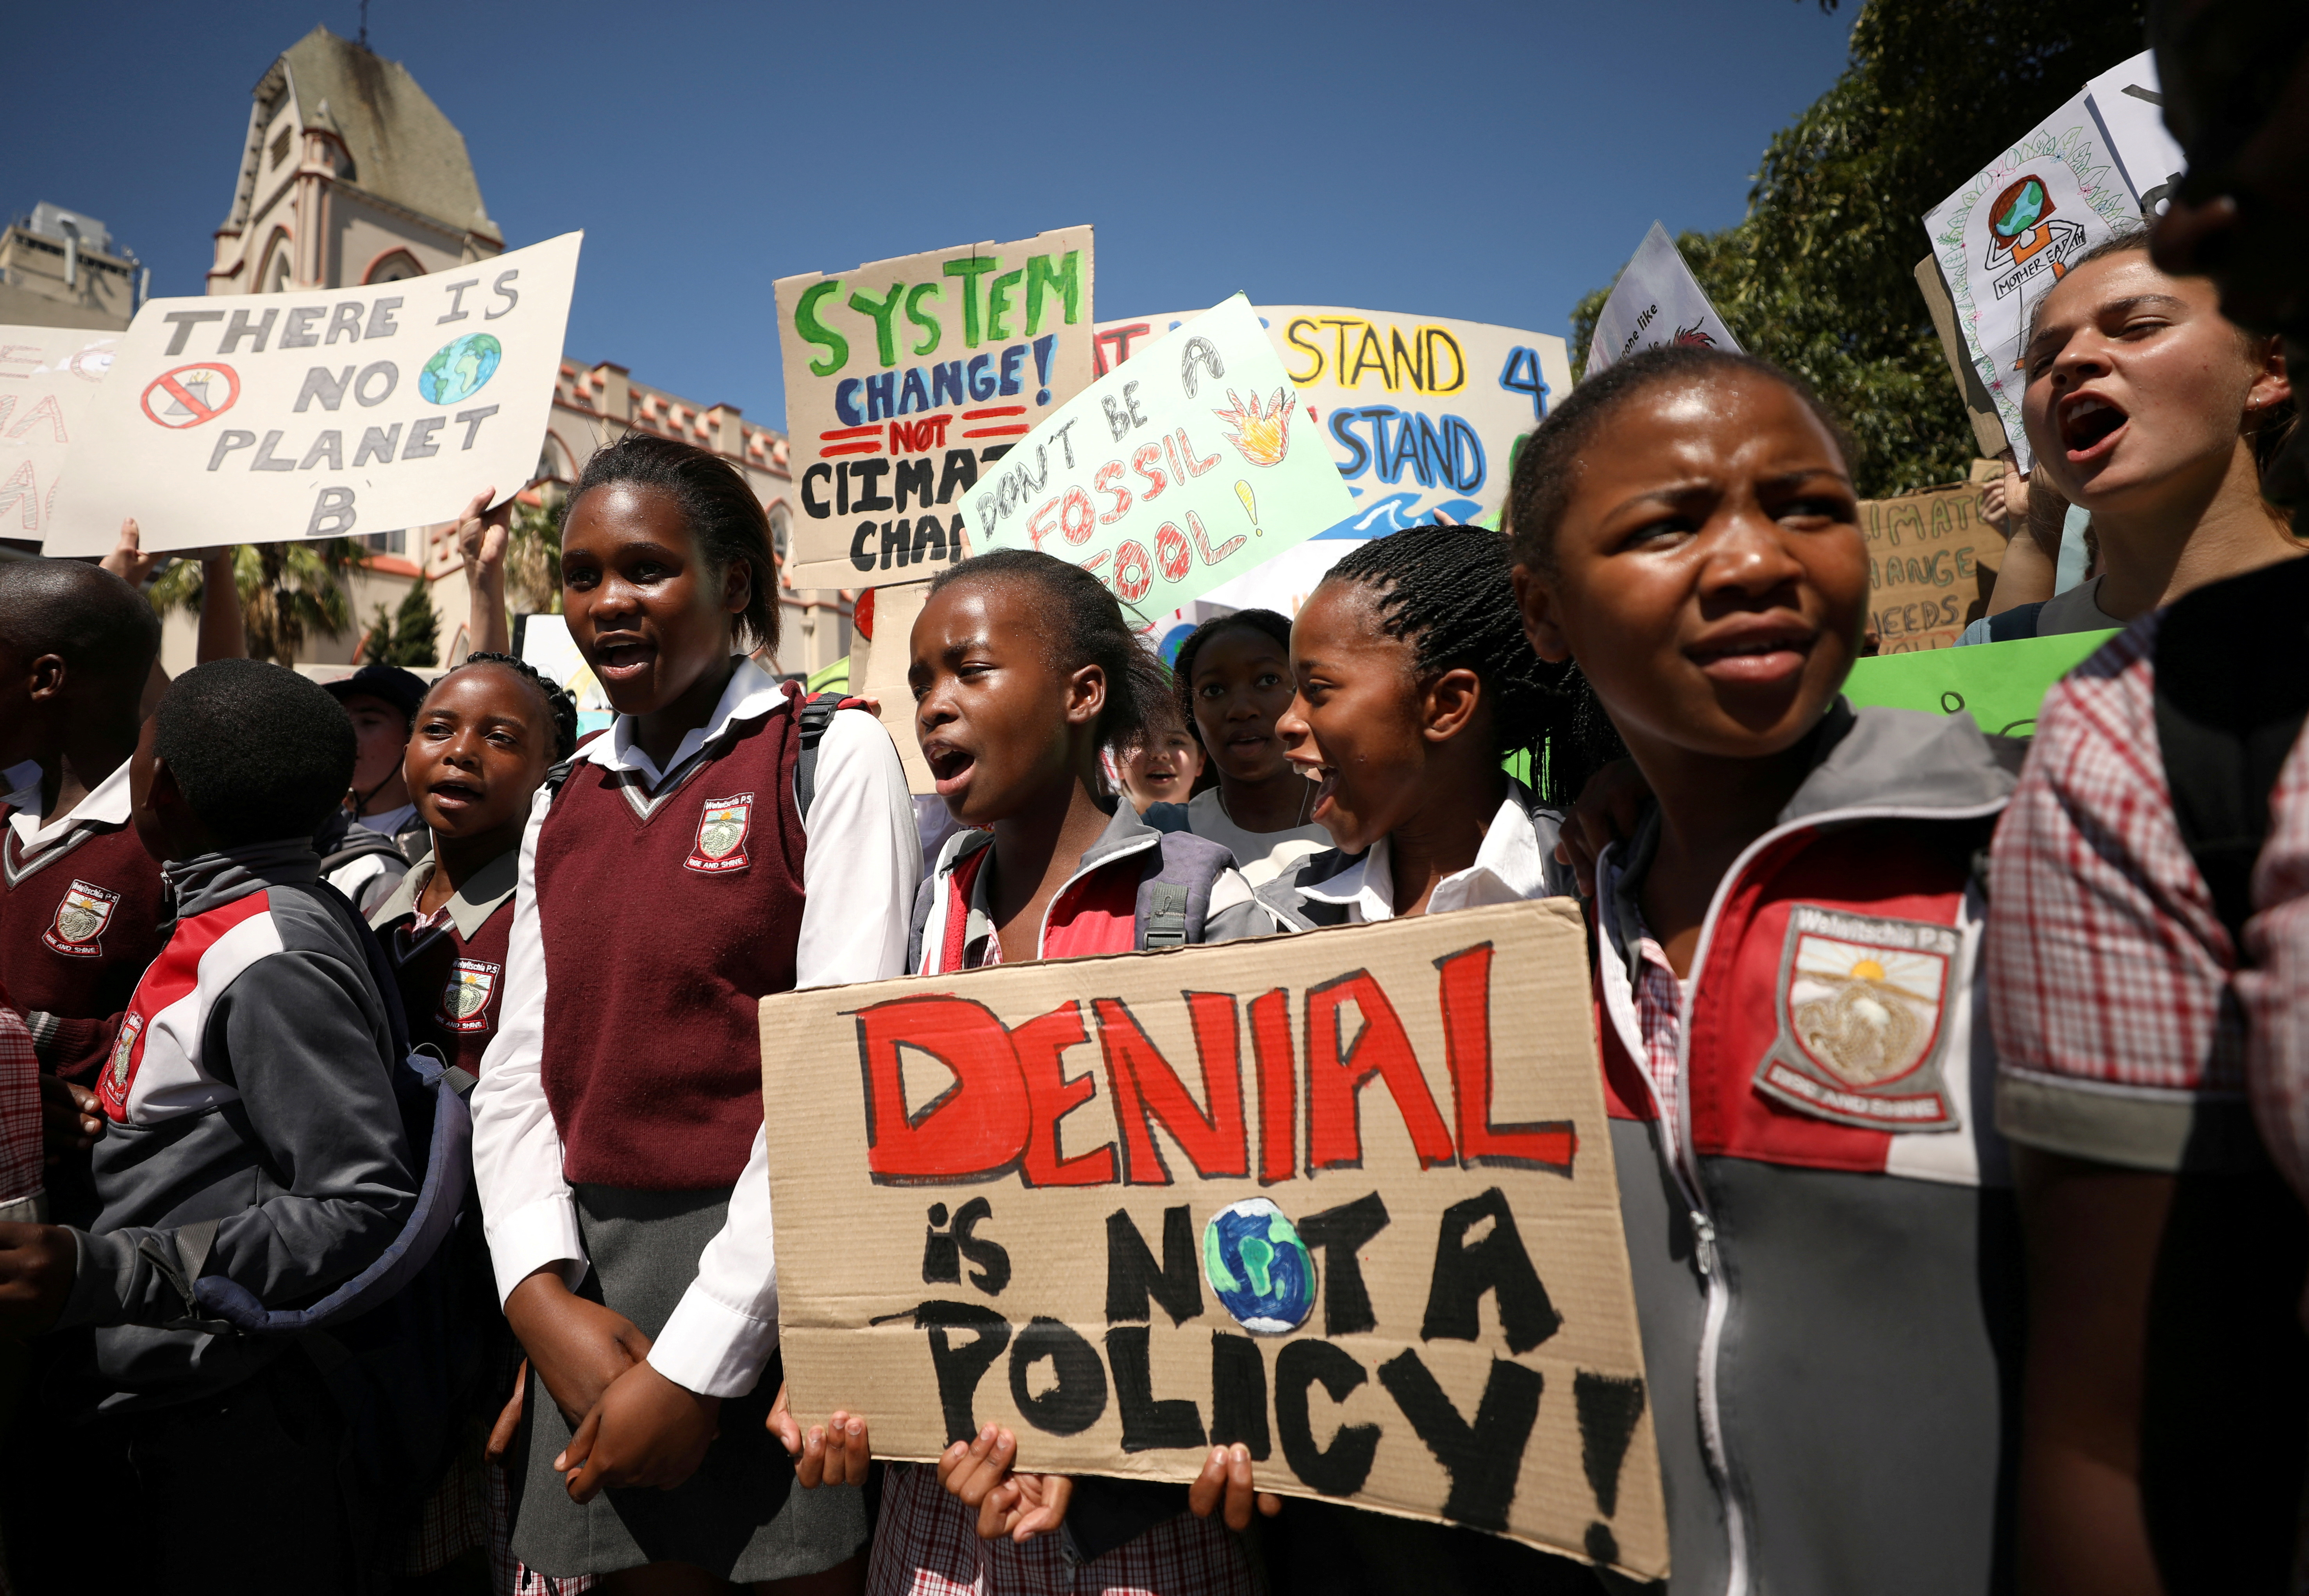 Students take part in a global protest against climate change in Cape Town, South Africa